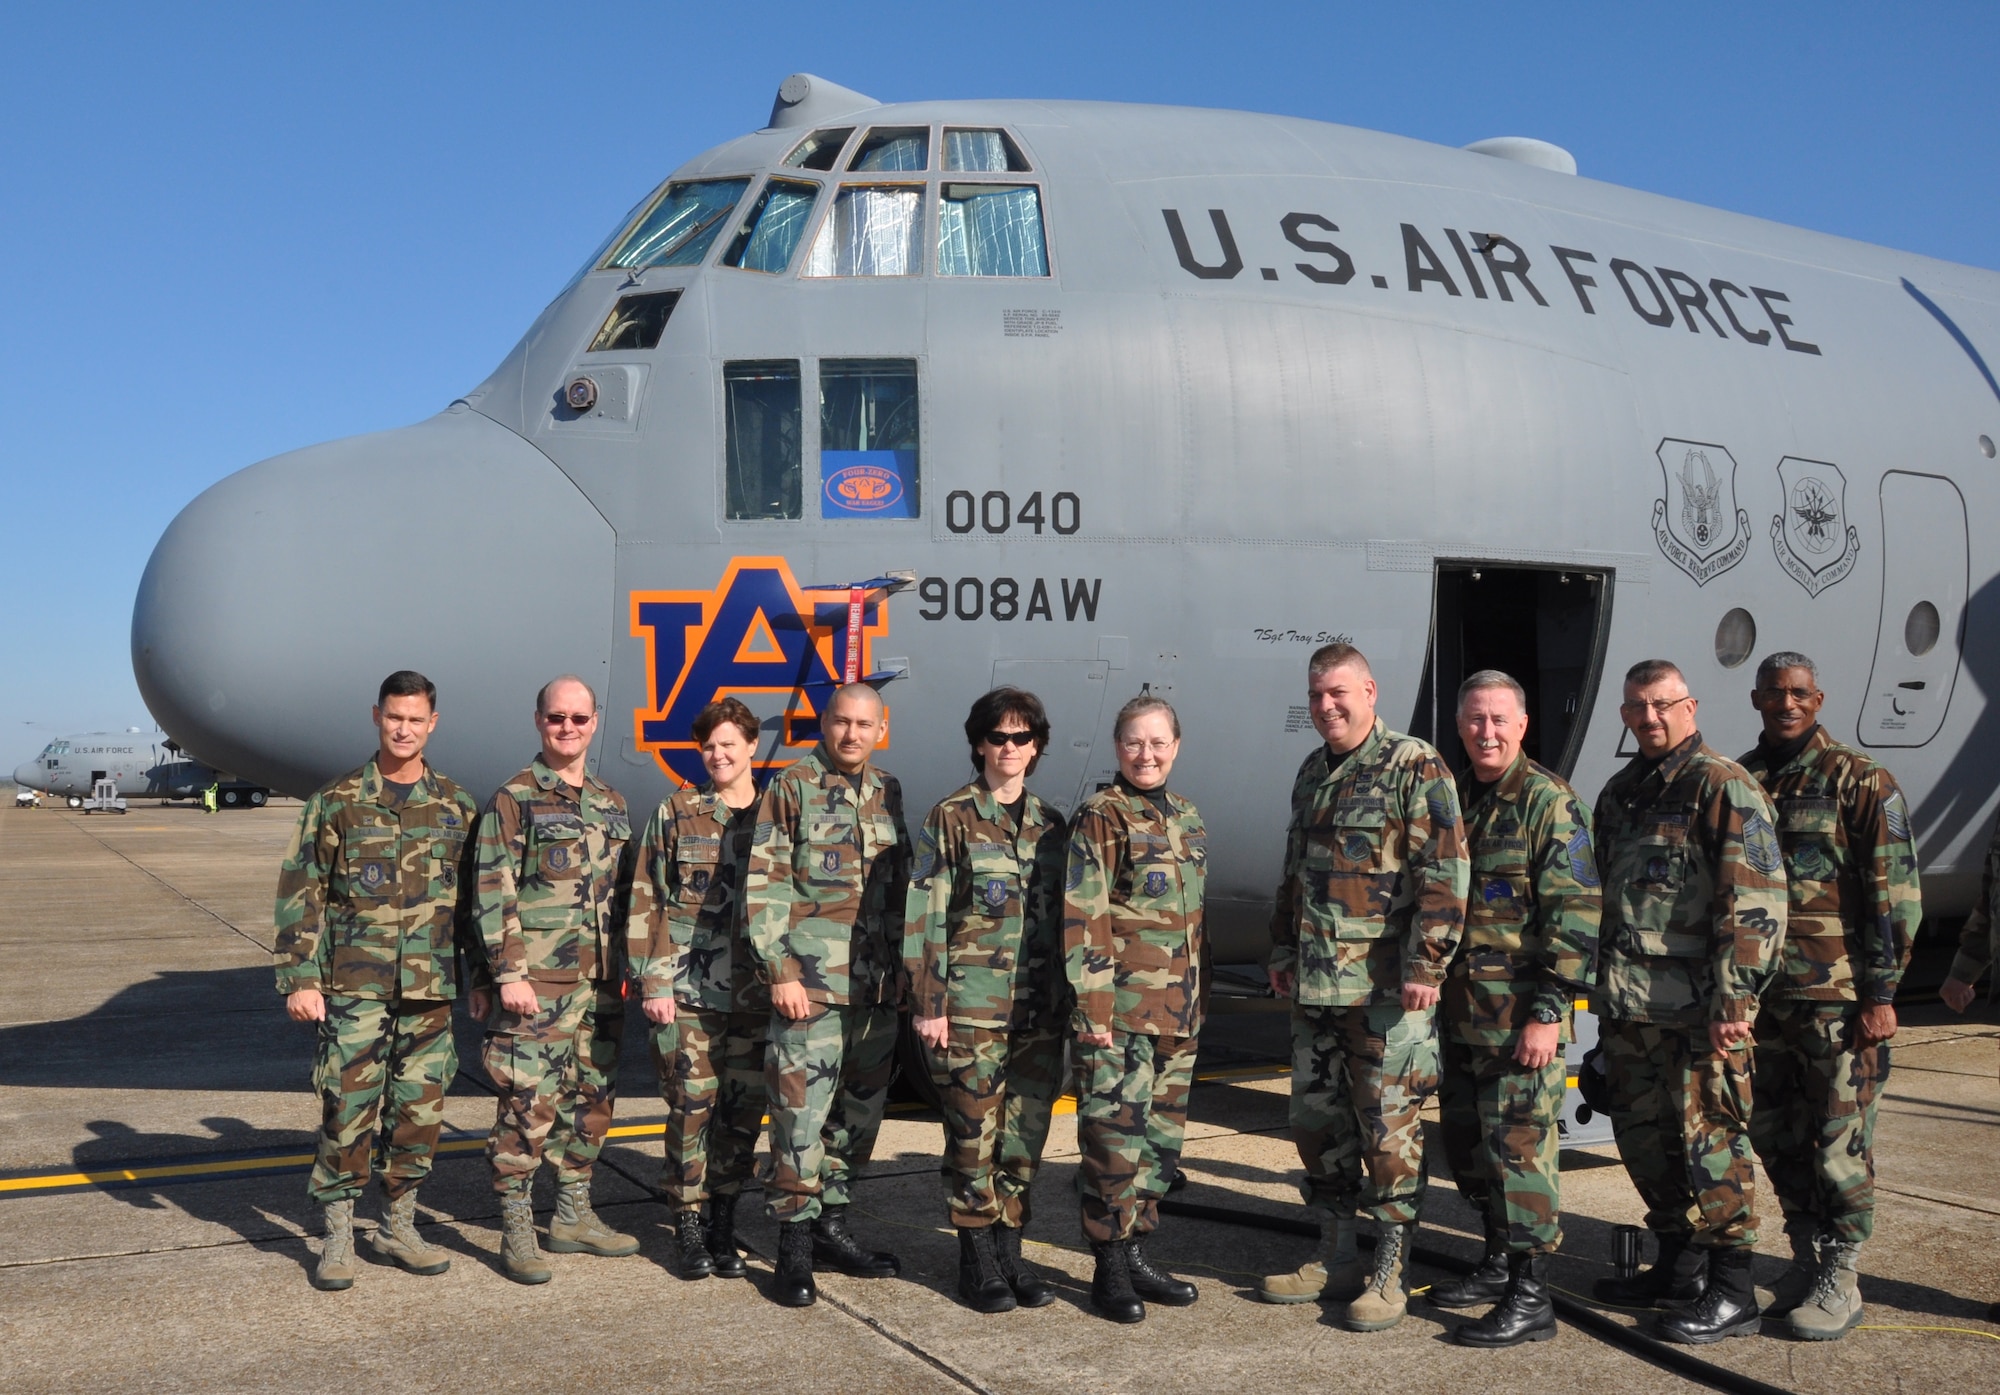 Col. Brett Clark, commander of the 908th Airlift Wing, left, and several members of his wing pose in Battle Dress Uniforms, or BDUs, one last time on Monday, the last day that uniform could be officially worn. After more than 30 years in service, BDUs are history, replaced by the Airman's Combat Uniform. (Air Force photo/Lt. Col. Jerry Lobb)